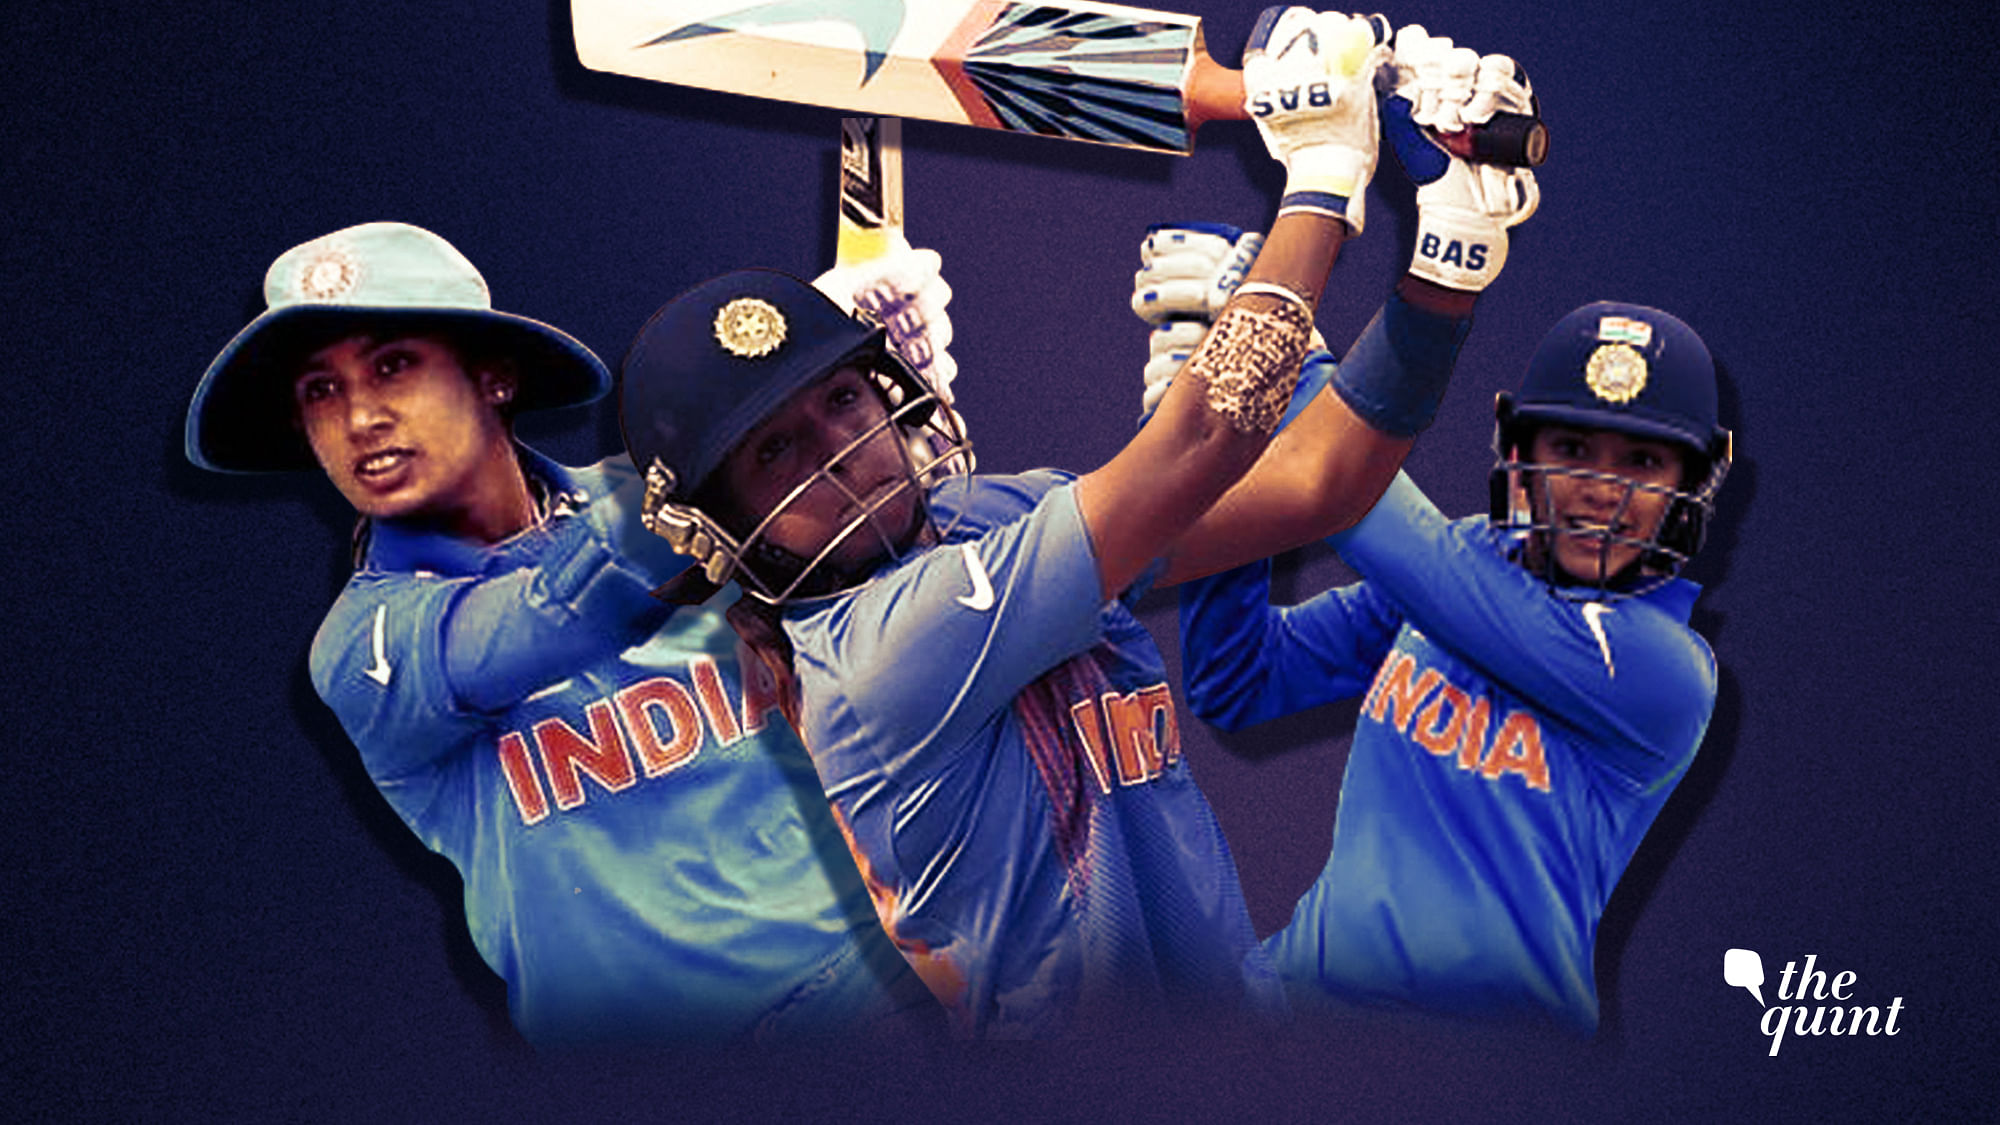 India topped Group B of the Women’s World T20 with outstanding performances from Mithali Raj (left), Harmanpreet Kaur (centre) and Smriti Mandhana.